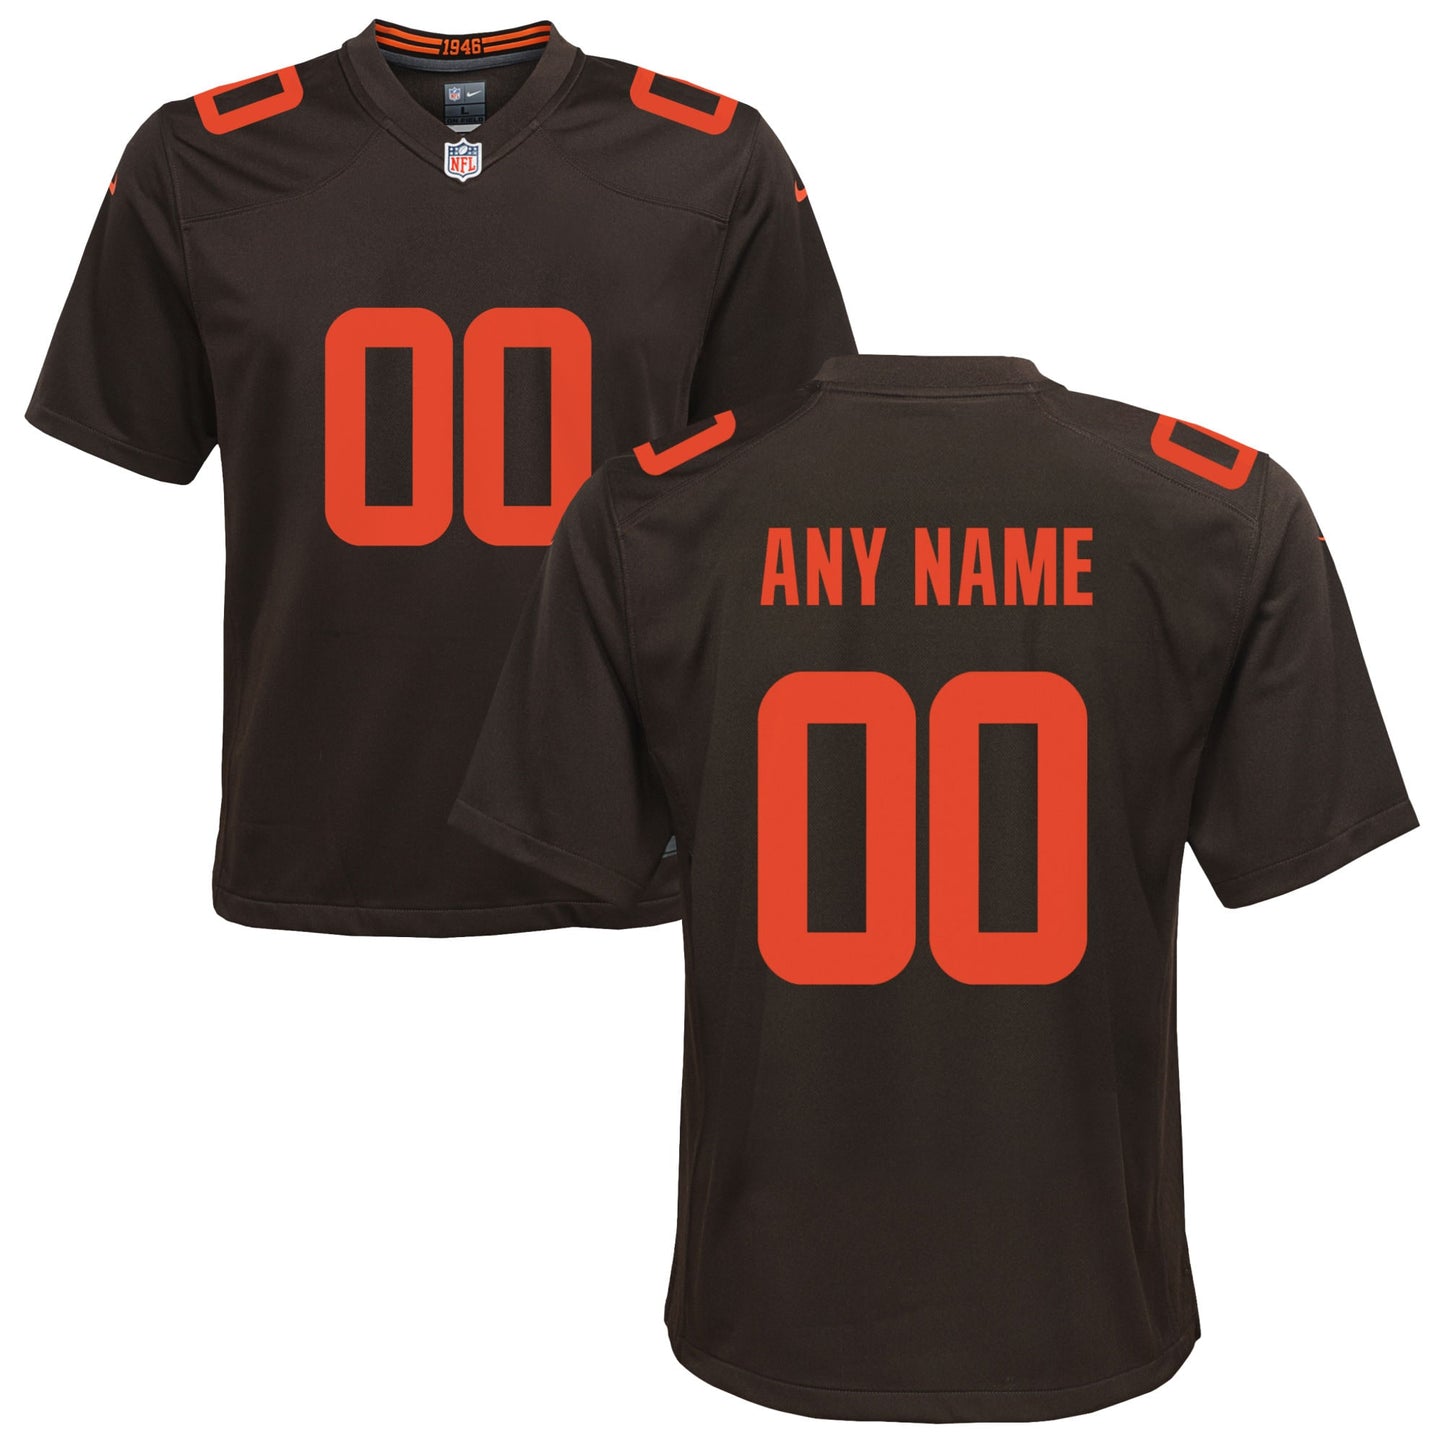 Cleveland Browns Nike Youth Alternate Custom Game Jersey - Brown